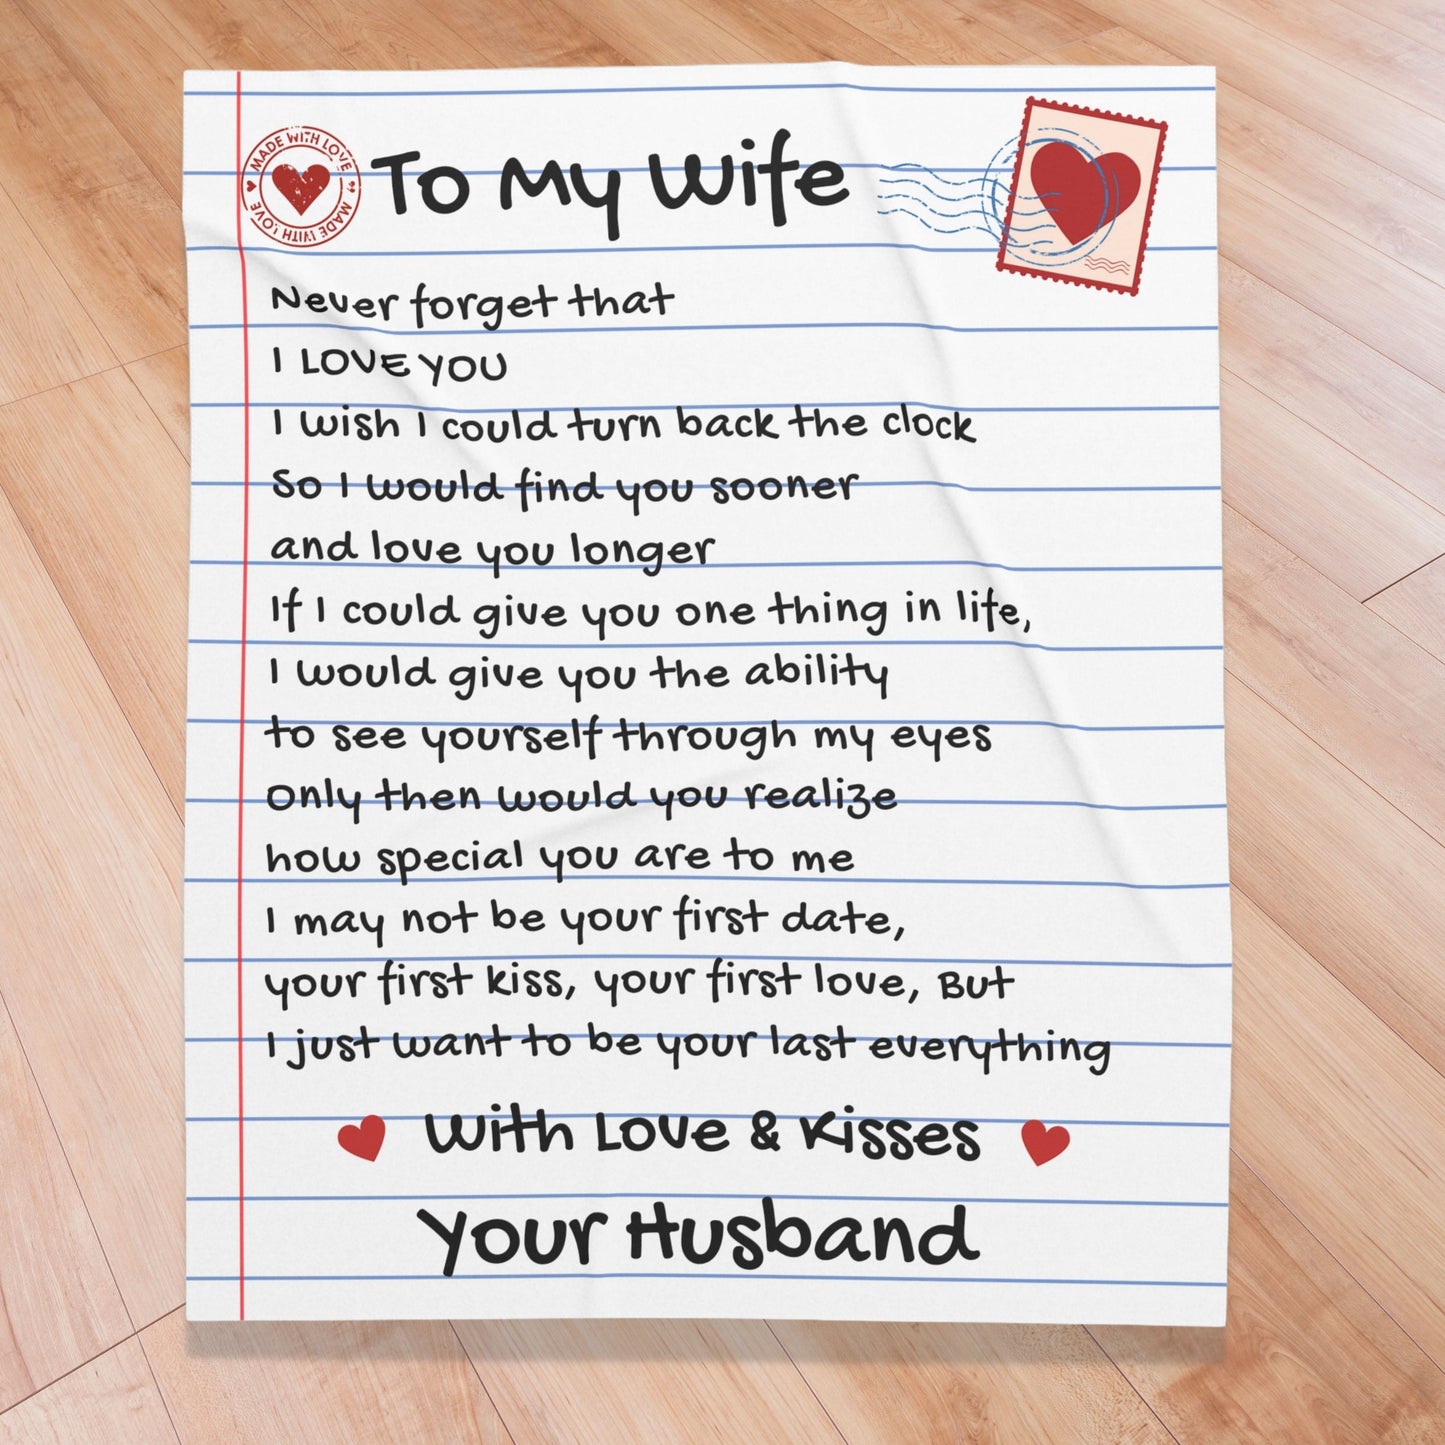 Love Letter To Wife-From Husband